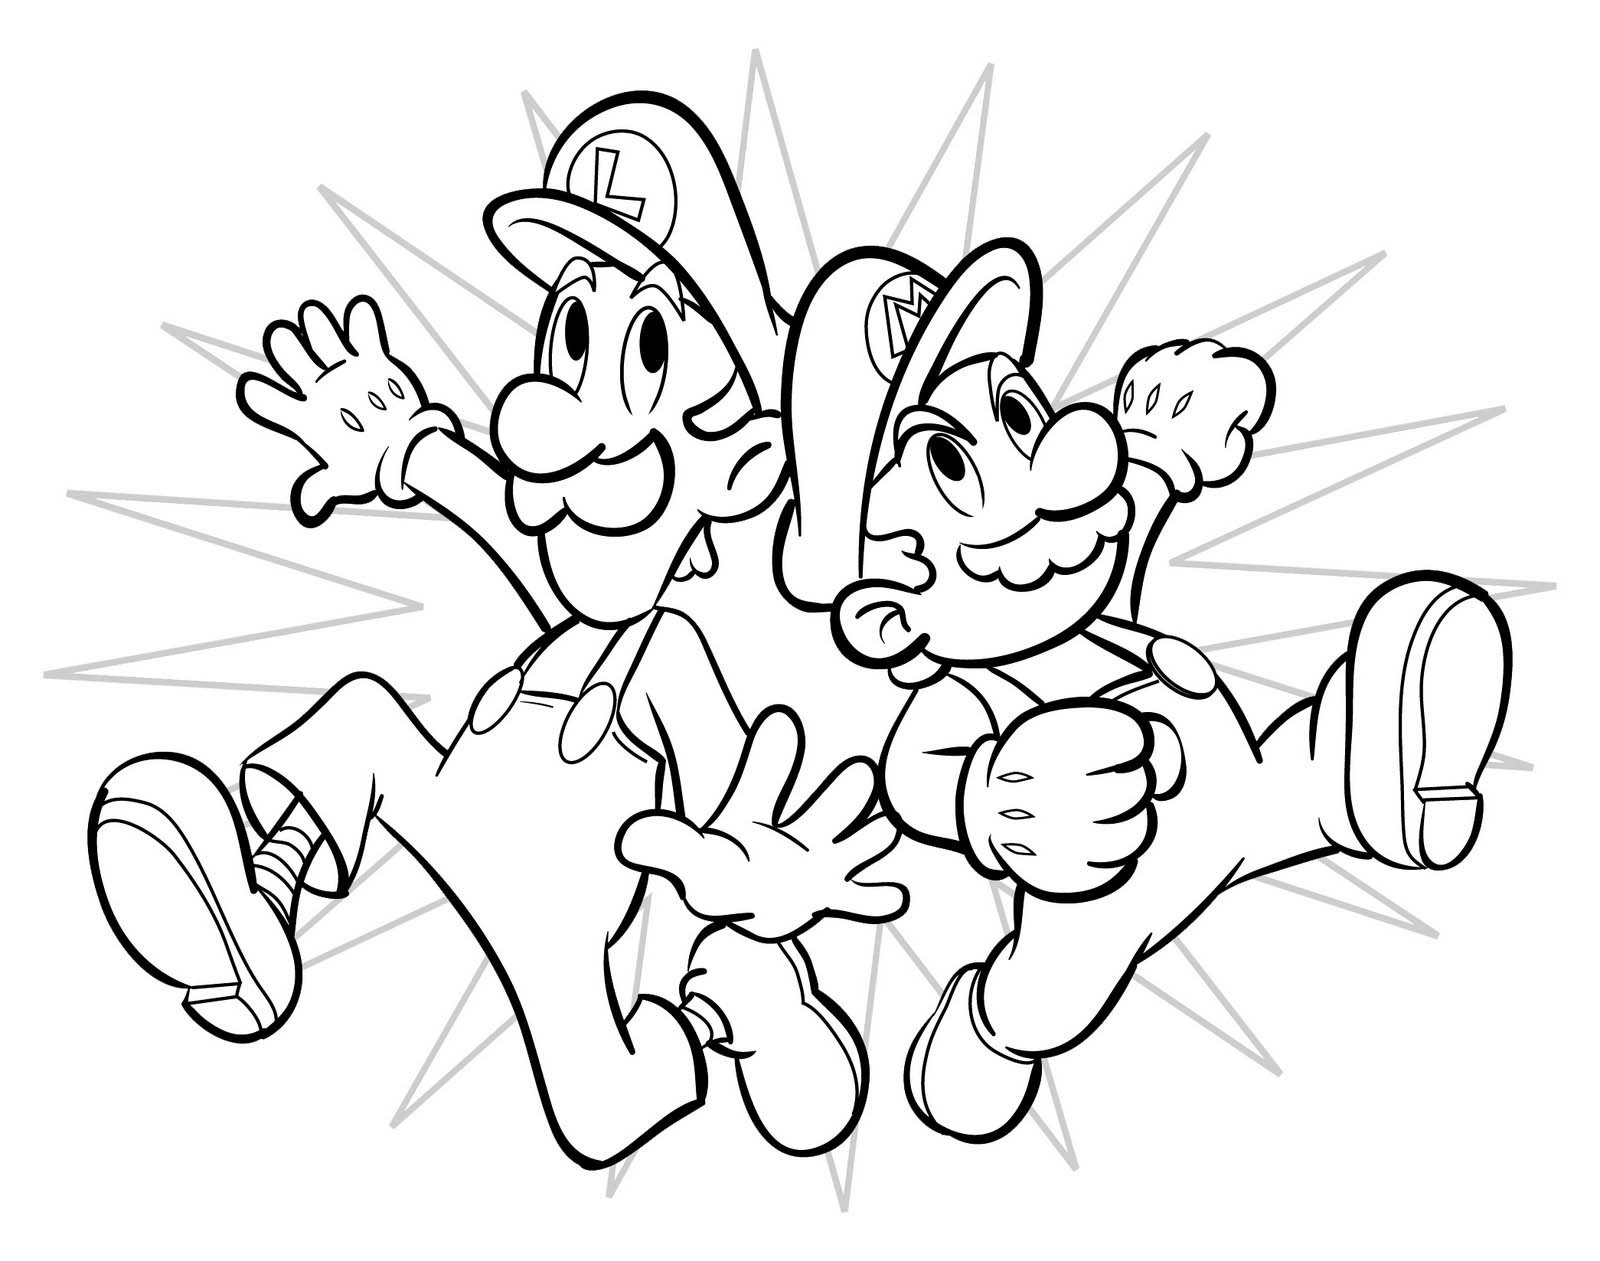 Coloring pages mega blog: Mario Bros coloring pages